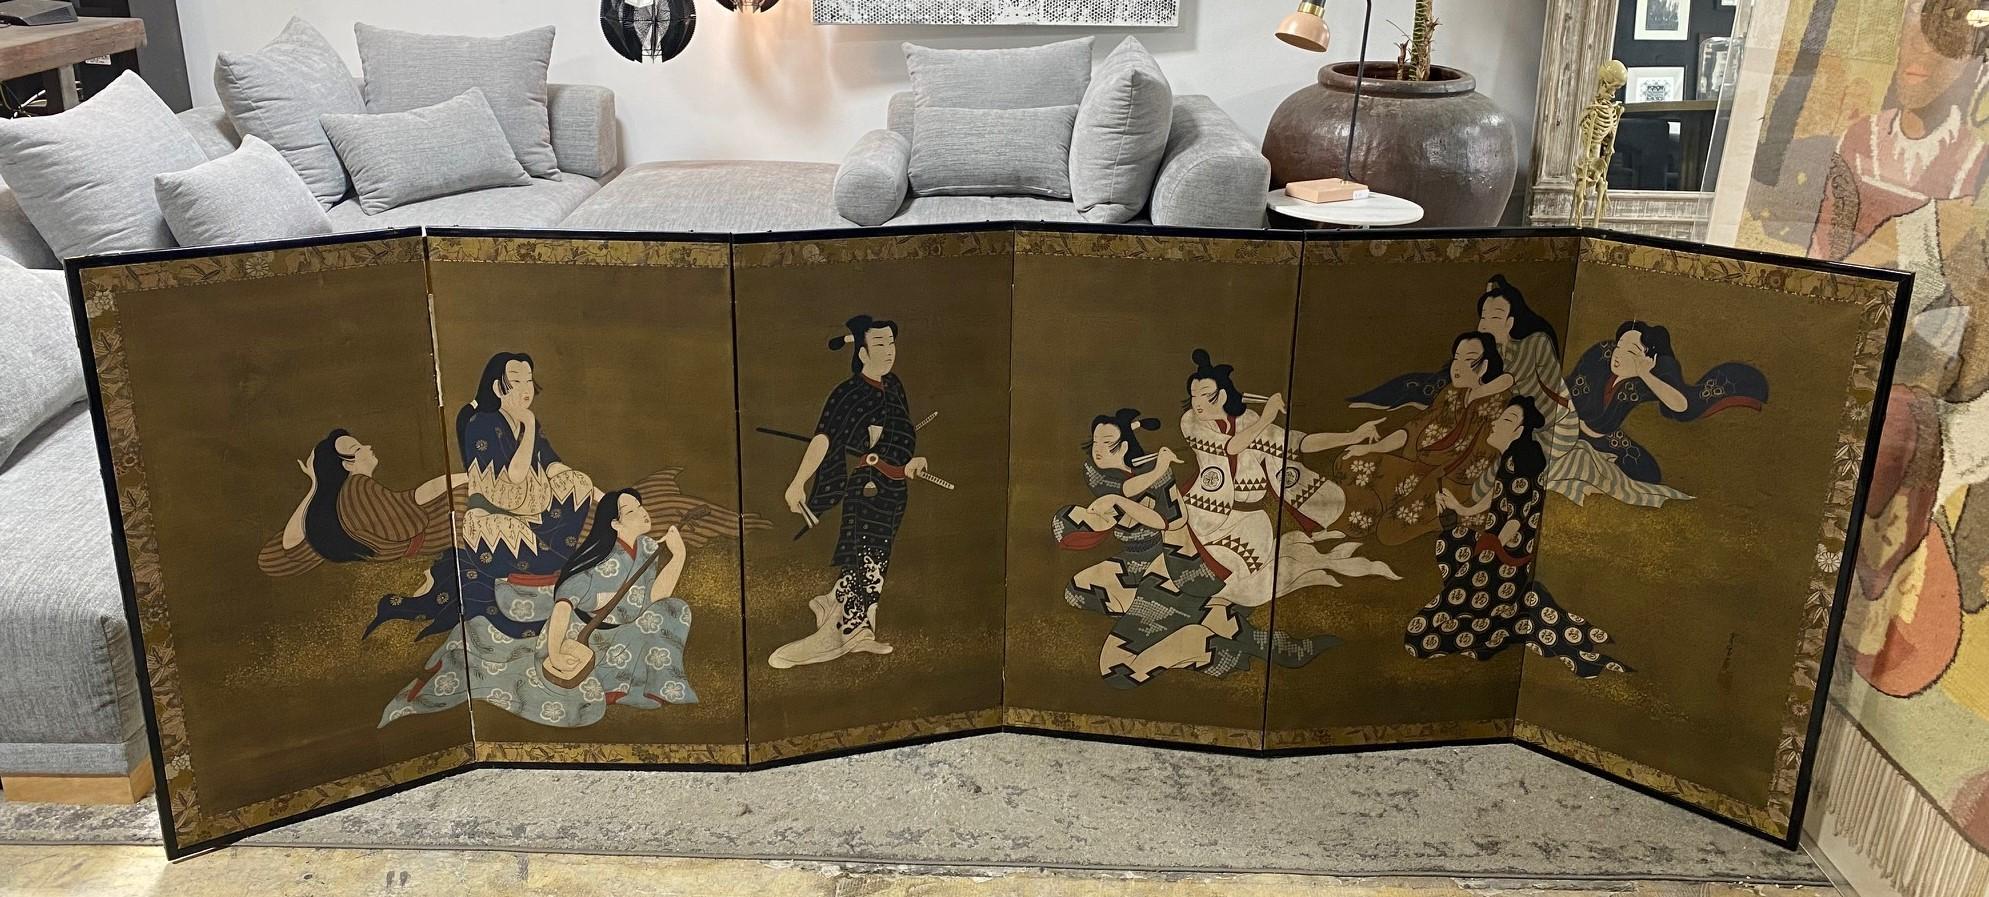 A gorgeous, quite fascinating hand-painted six-panel Japanese Byobu folding screen depicting a rather engaging androgynous or erotic court scene (it has been suggested to us that this could be a lesbian party). The central figure and characters on